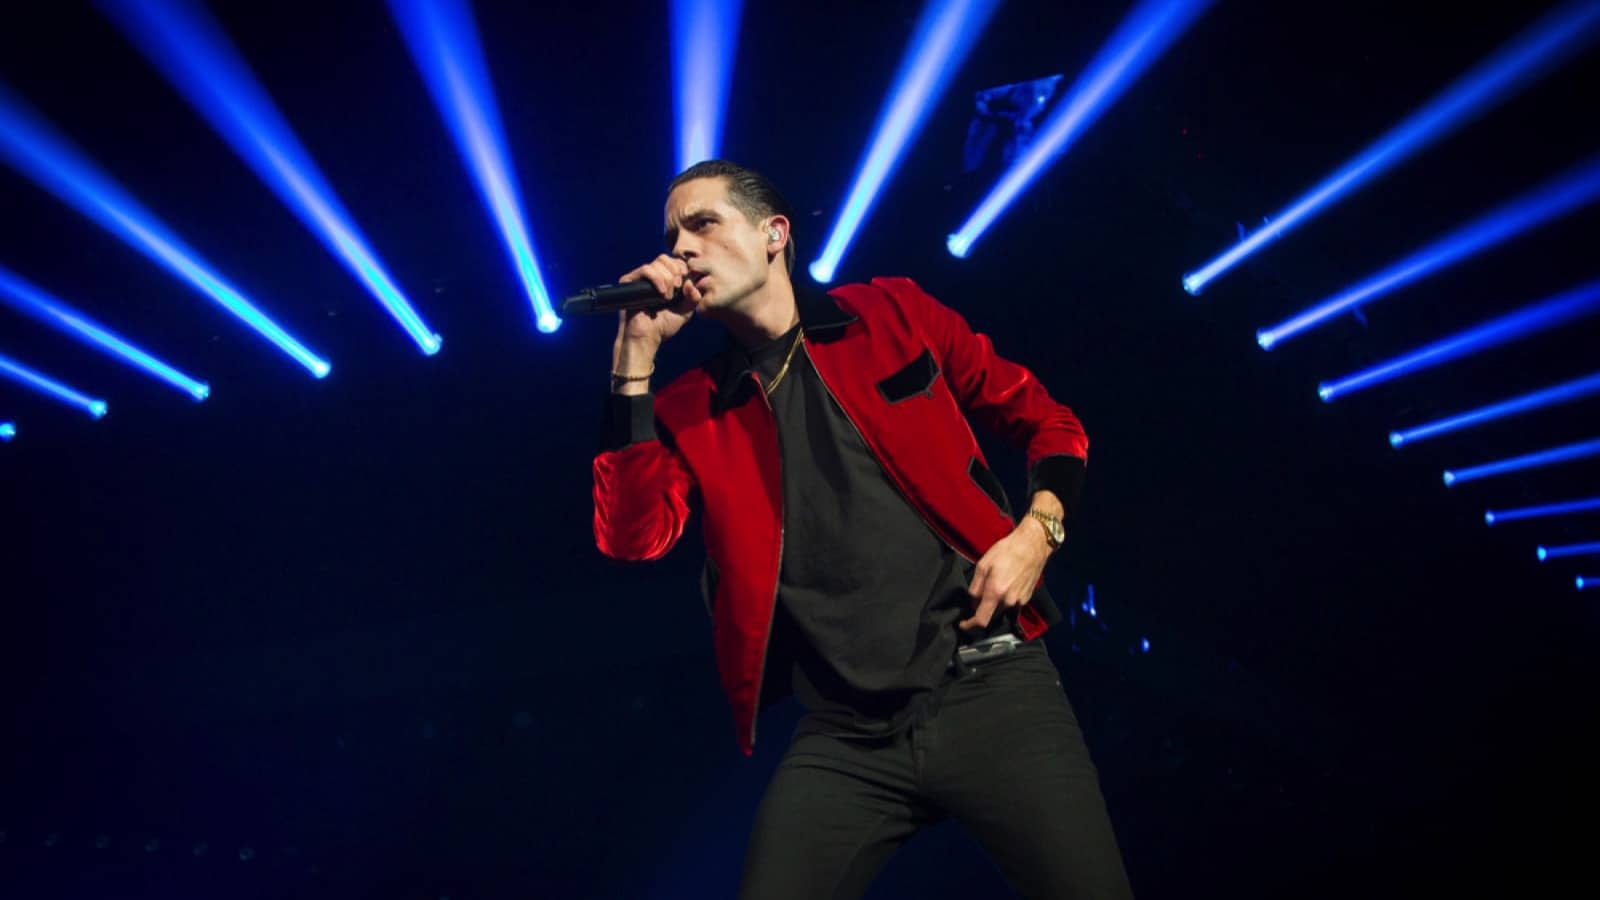 Oakland, CA/USA - 12/14/2016: Gerald Earl Gillum also known as G-Eazy performs at the Oracle Arena in Oakland. His album peaked at 3 on US Billboard 200 and his single, 10 on the US Billboard Hot 100.